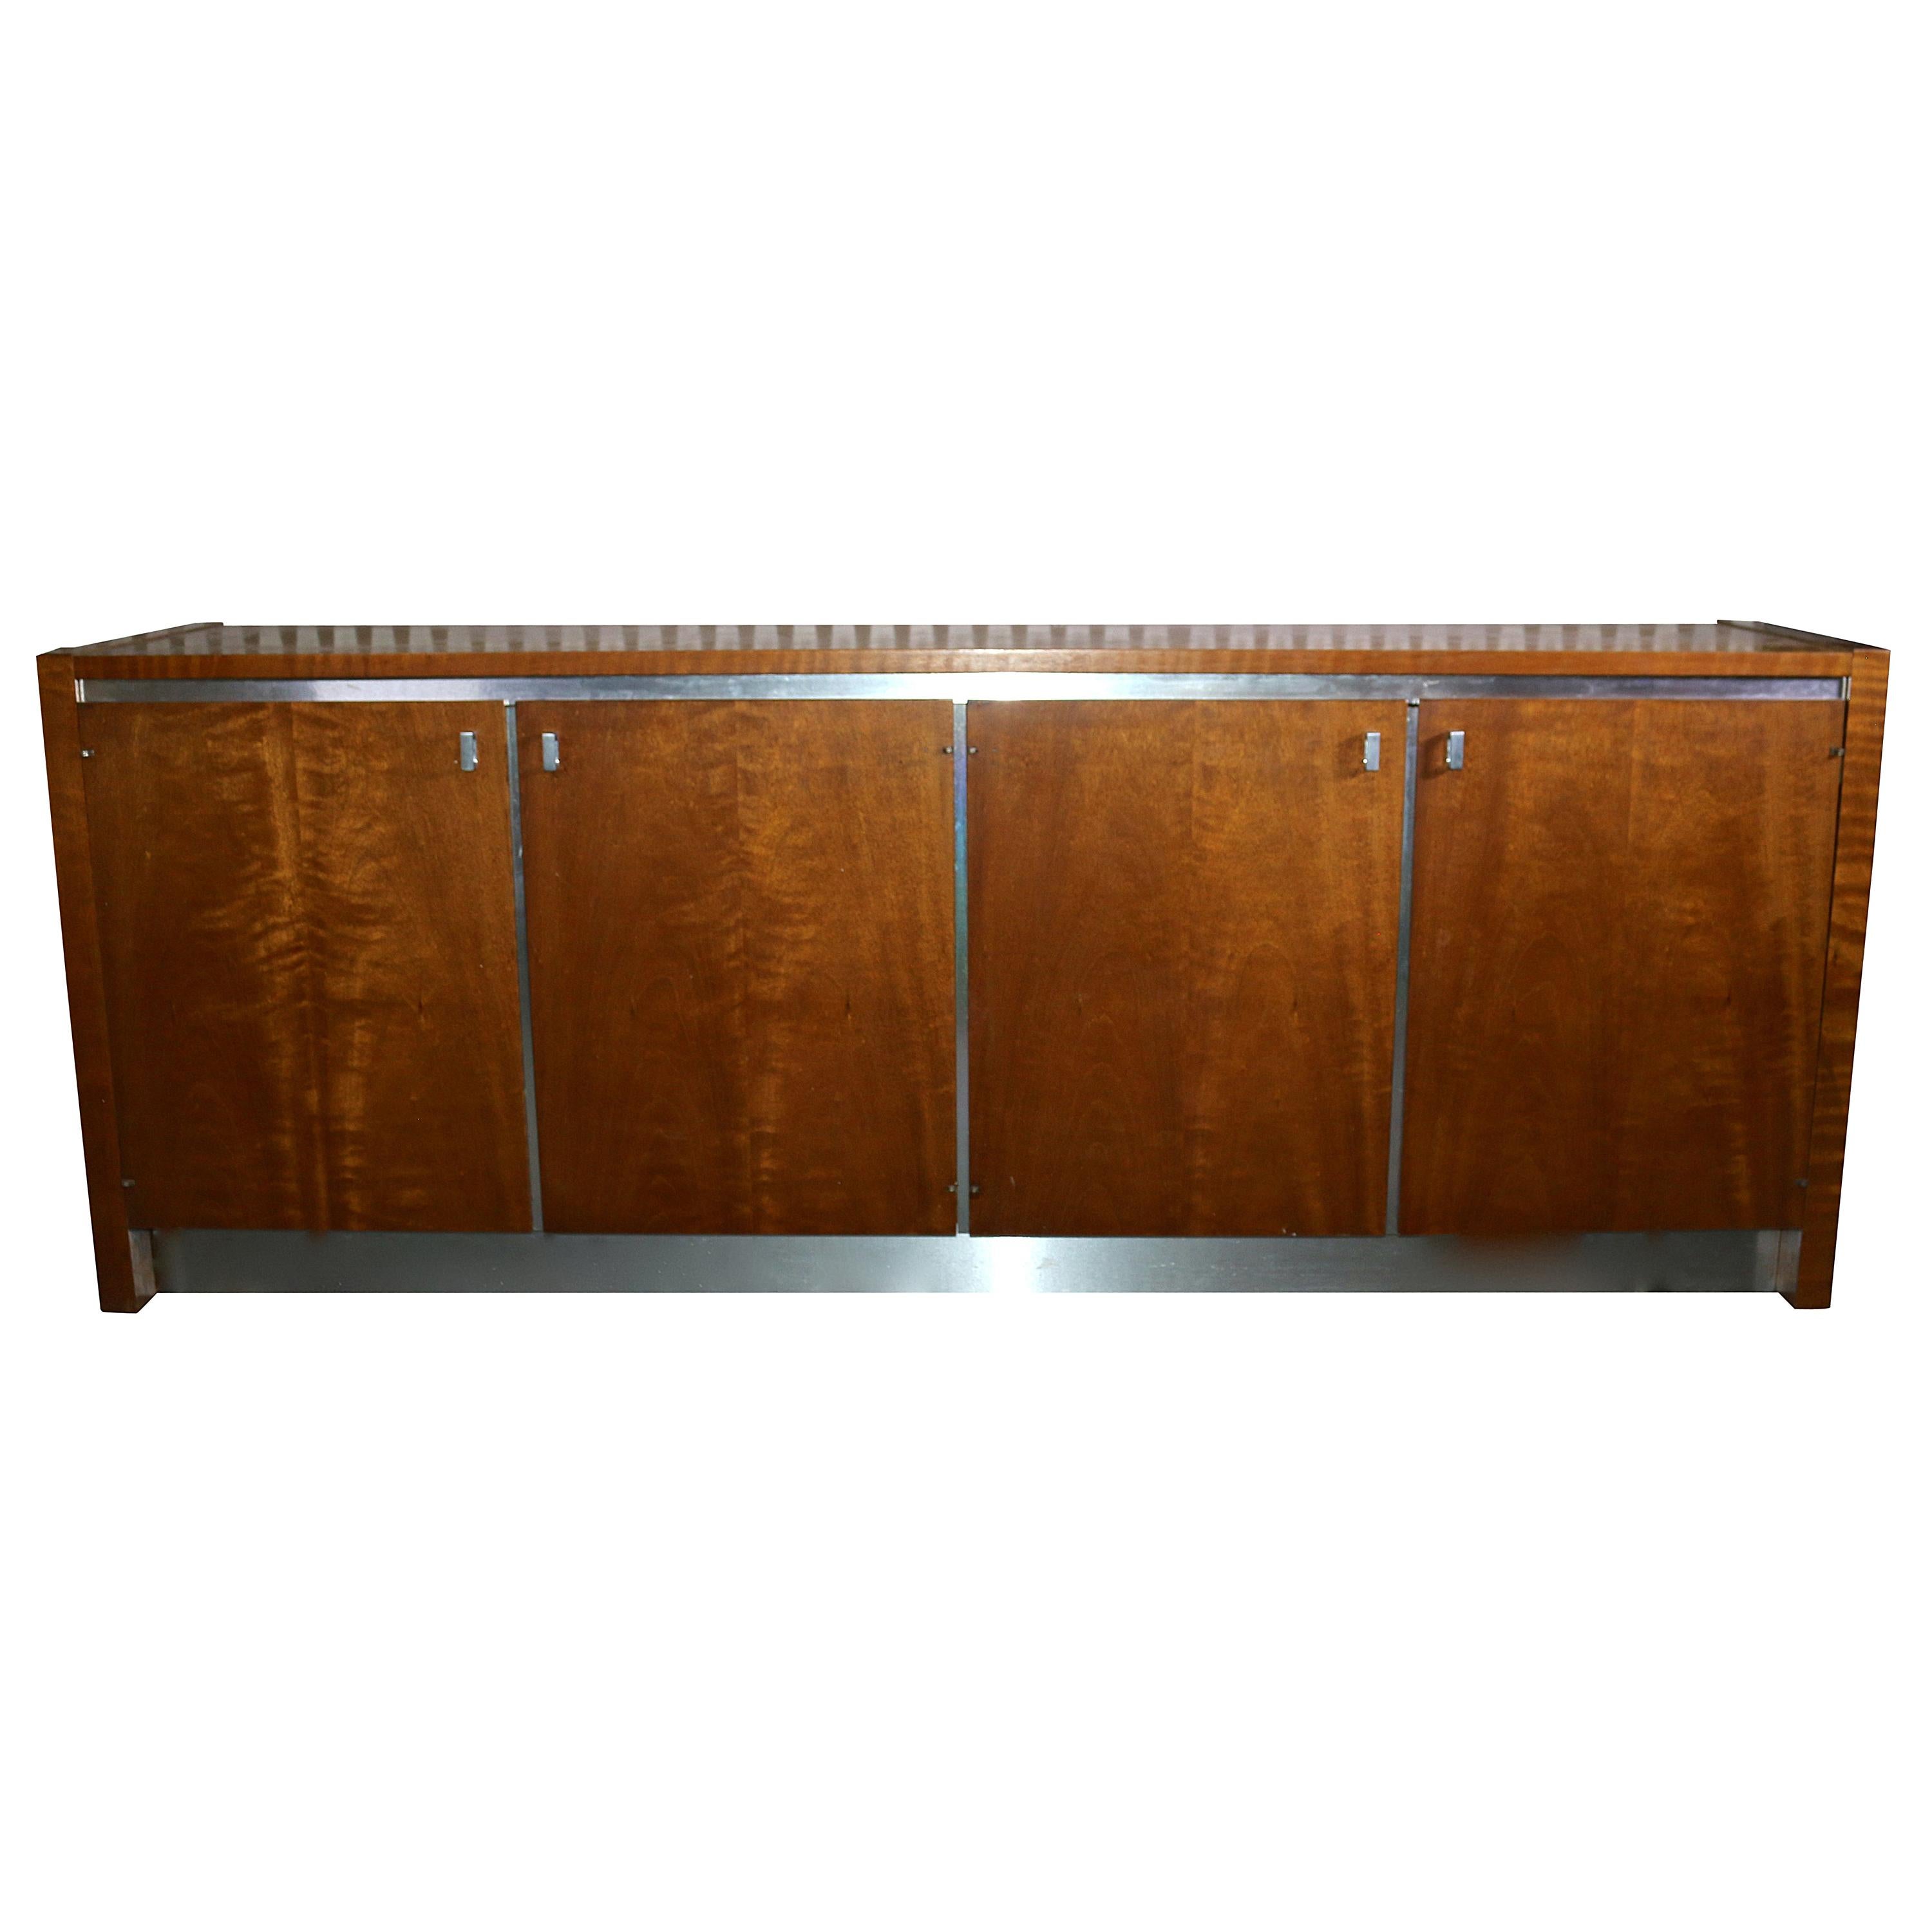 Modern Midcentury Credenza by Founders